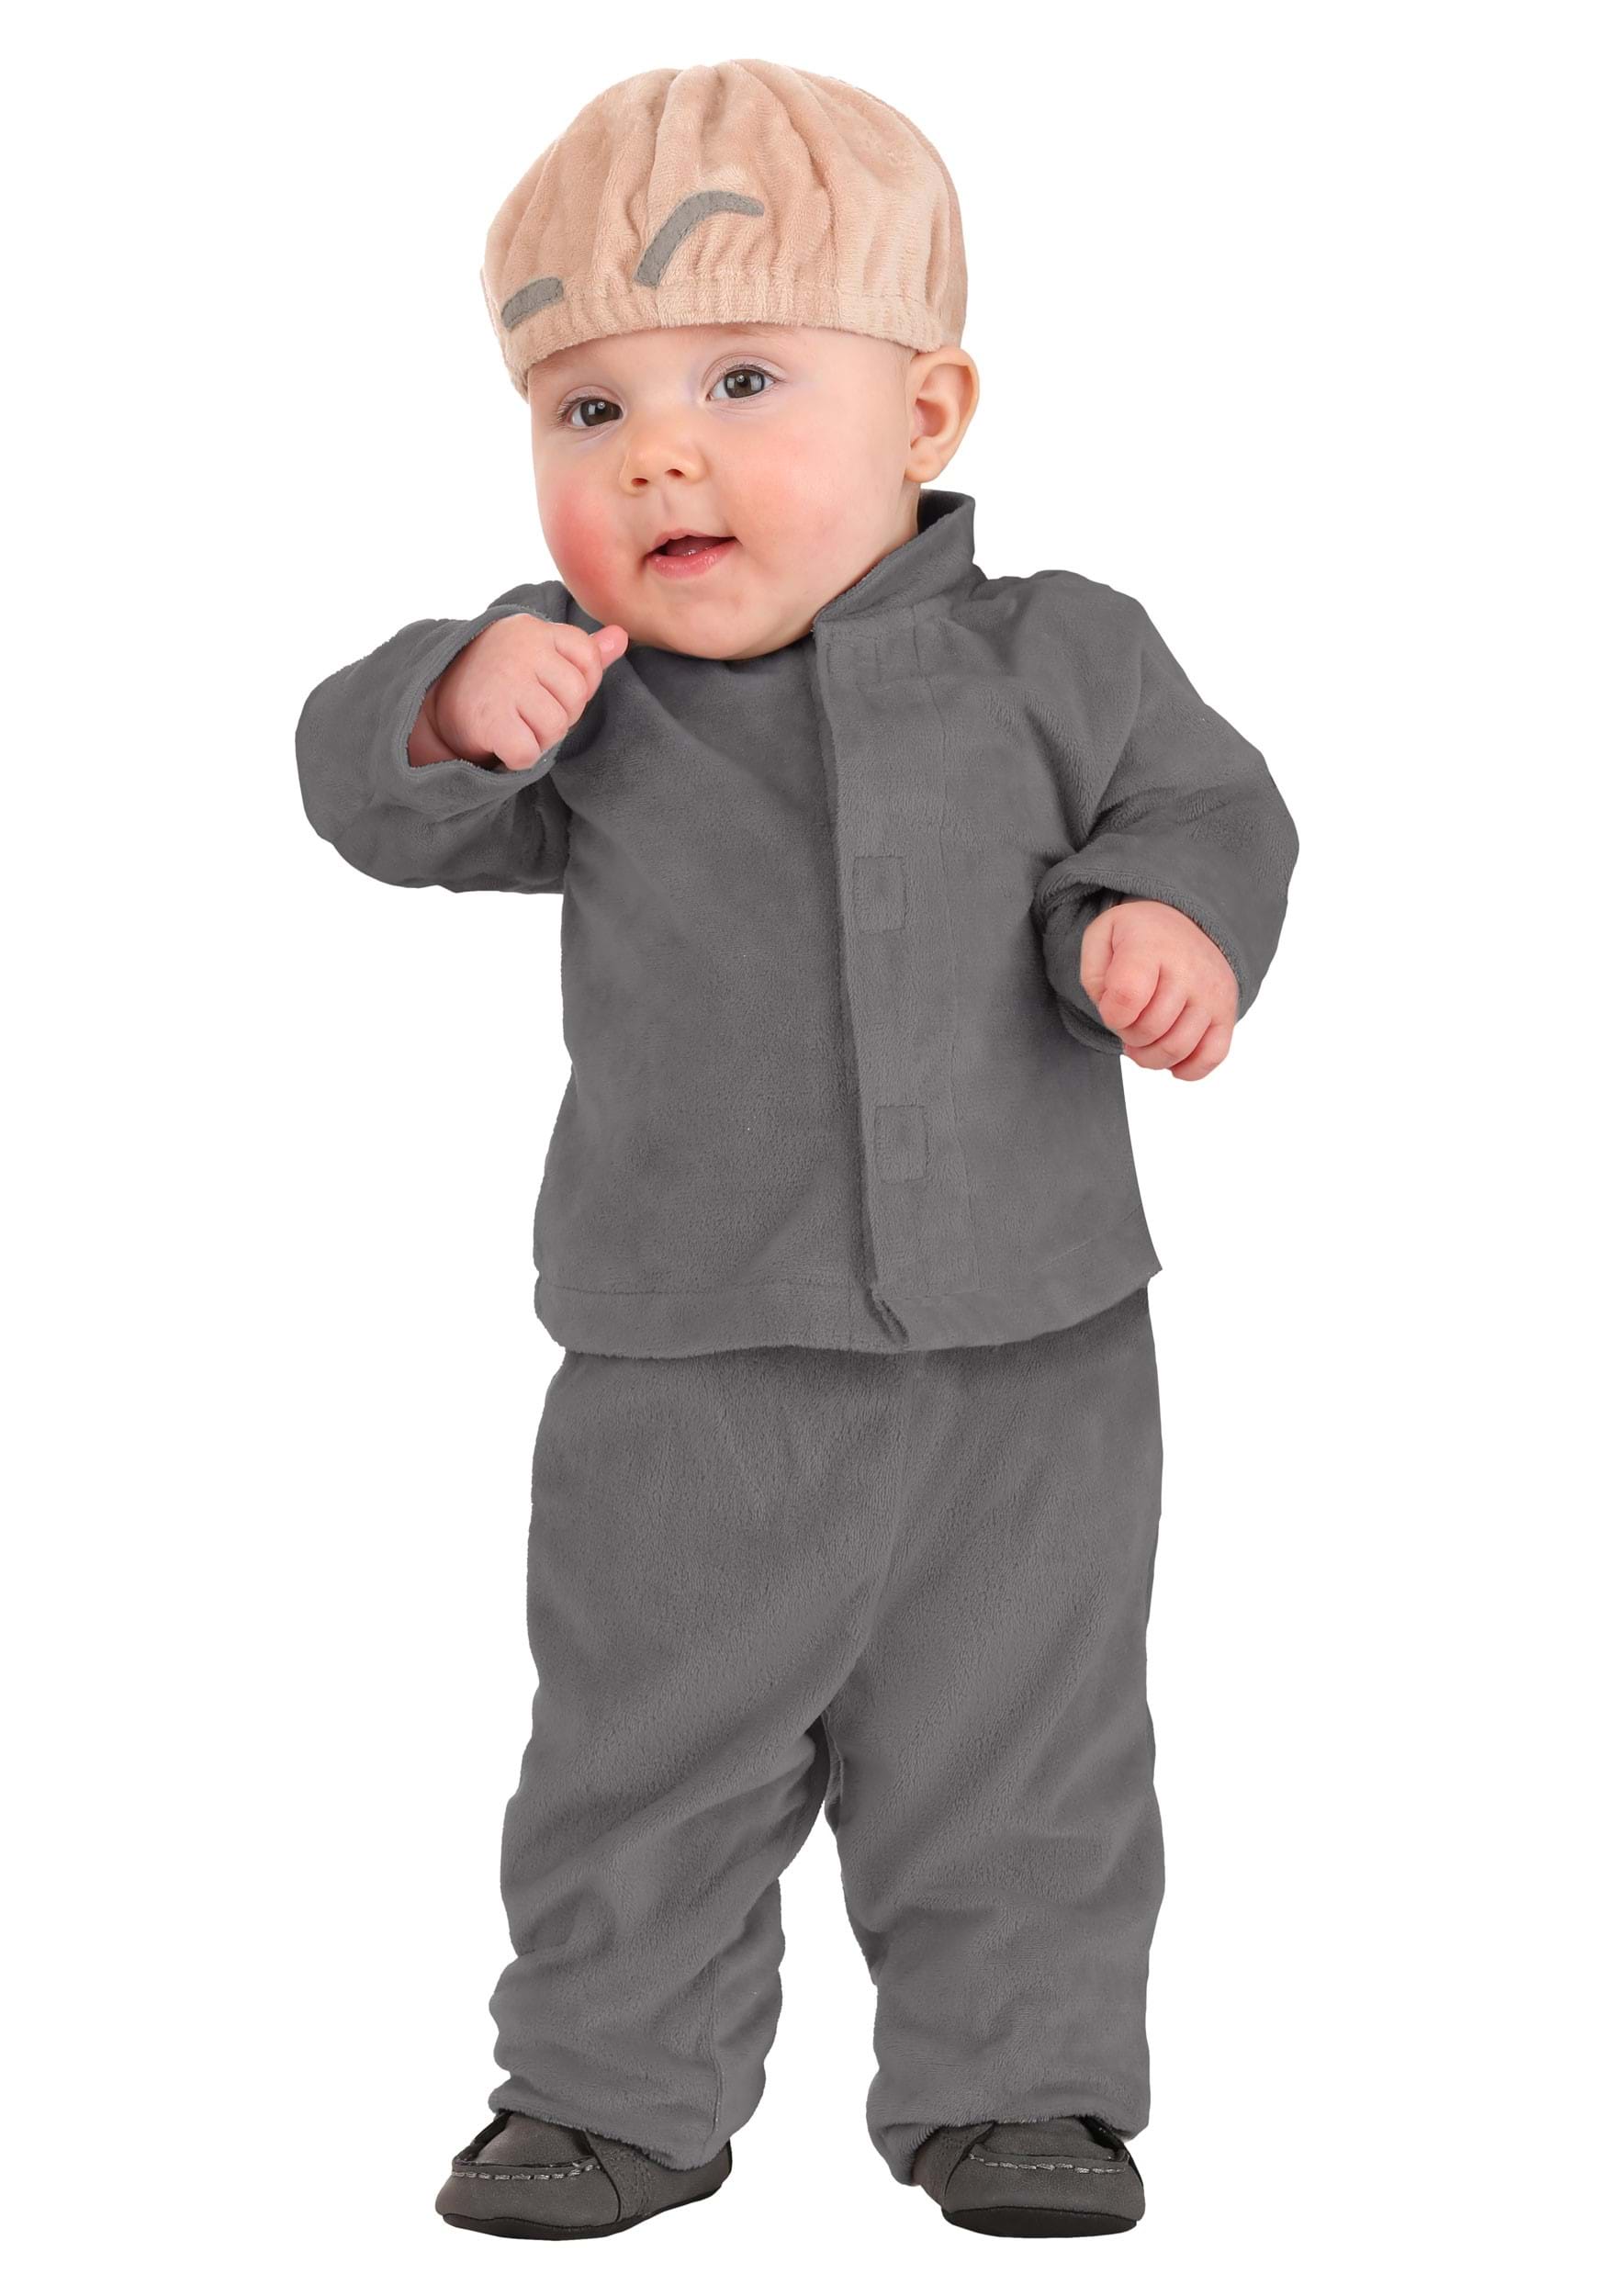 Photos - Fancy Dress FUN Costumes Evil Gray Suit Infant Costume Brown/Gray FUN1721IN